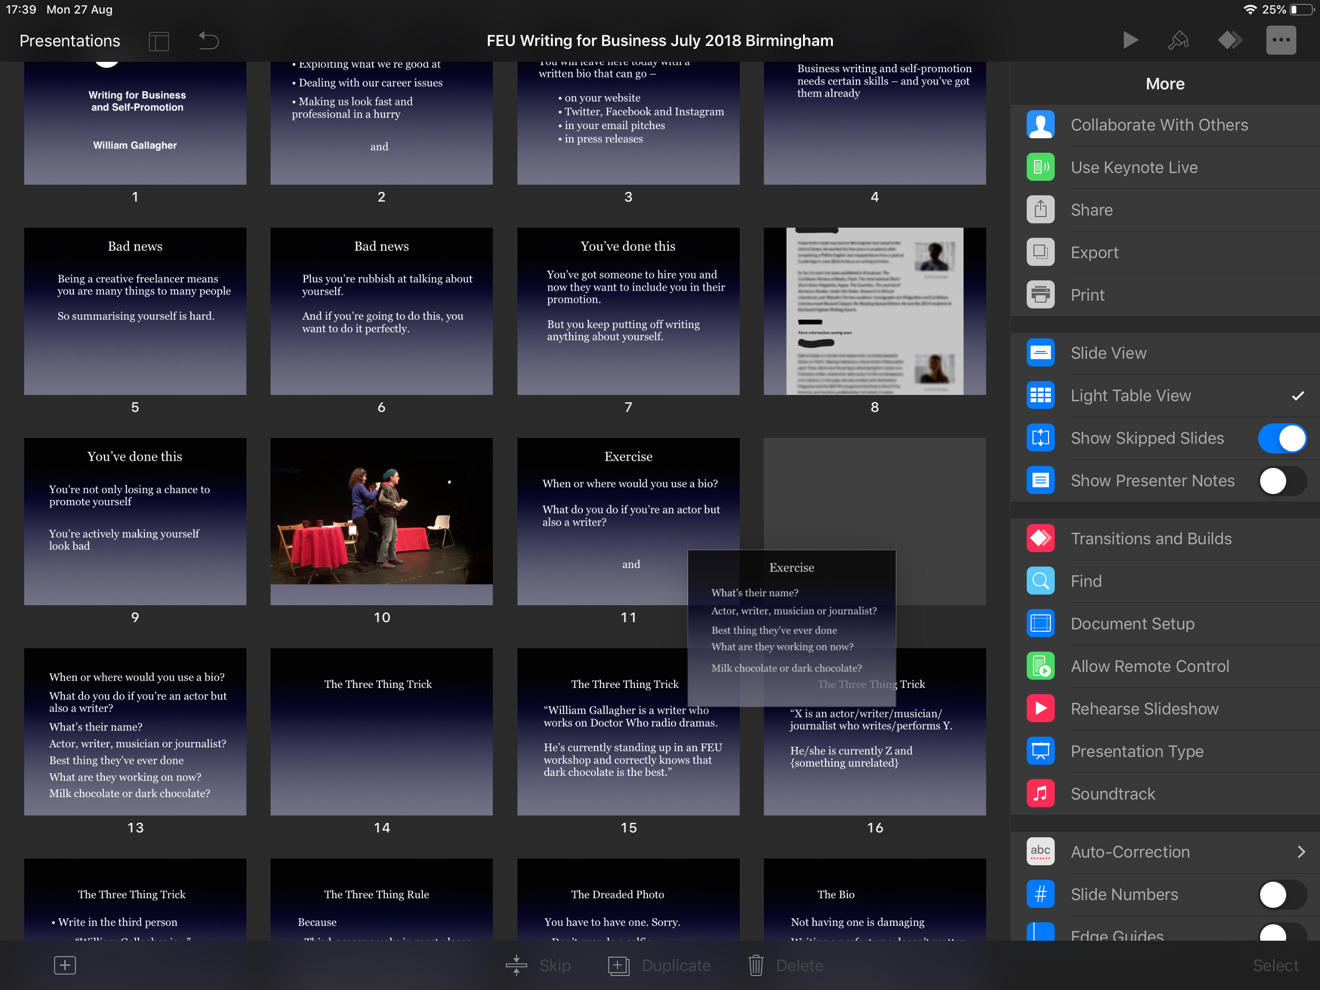 How to use Apple's Keynote on the Mac and iPad to prepare compelling